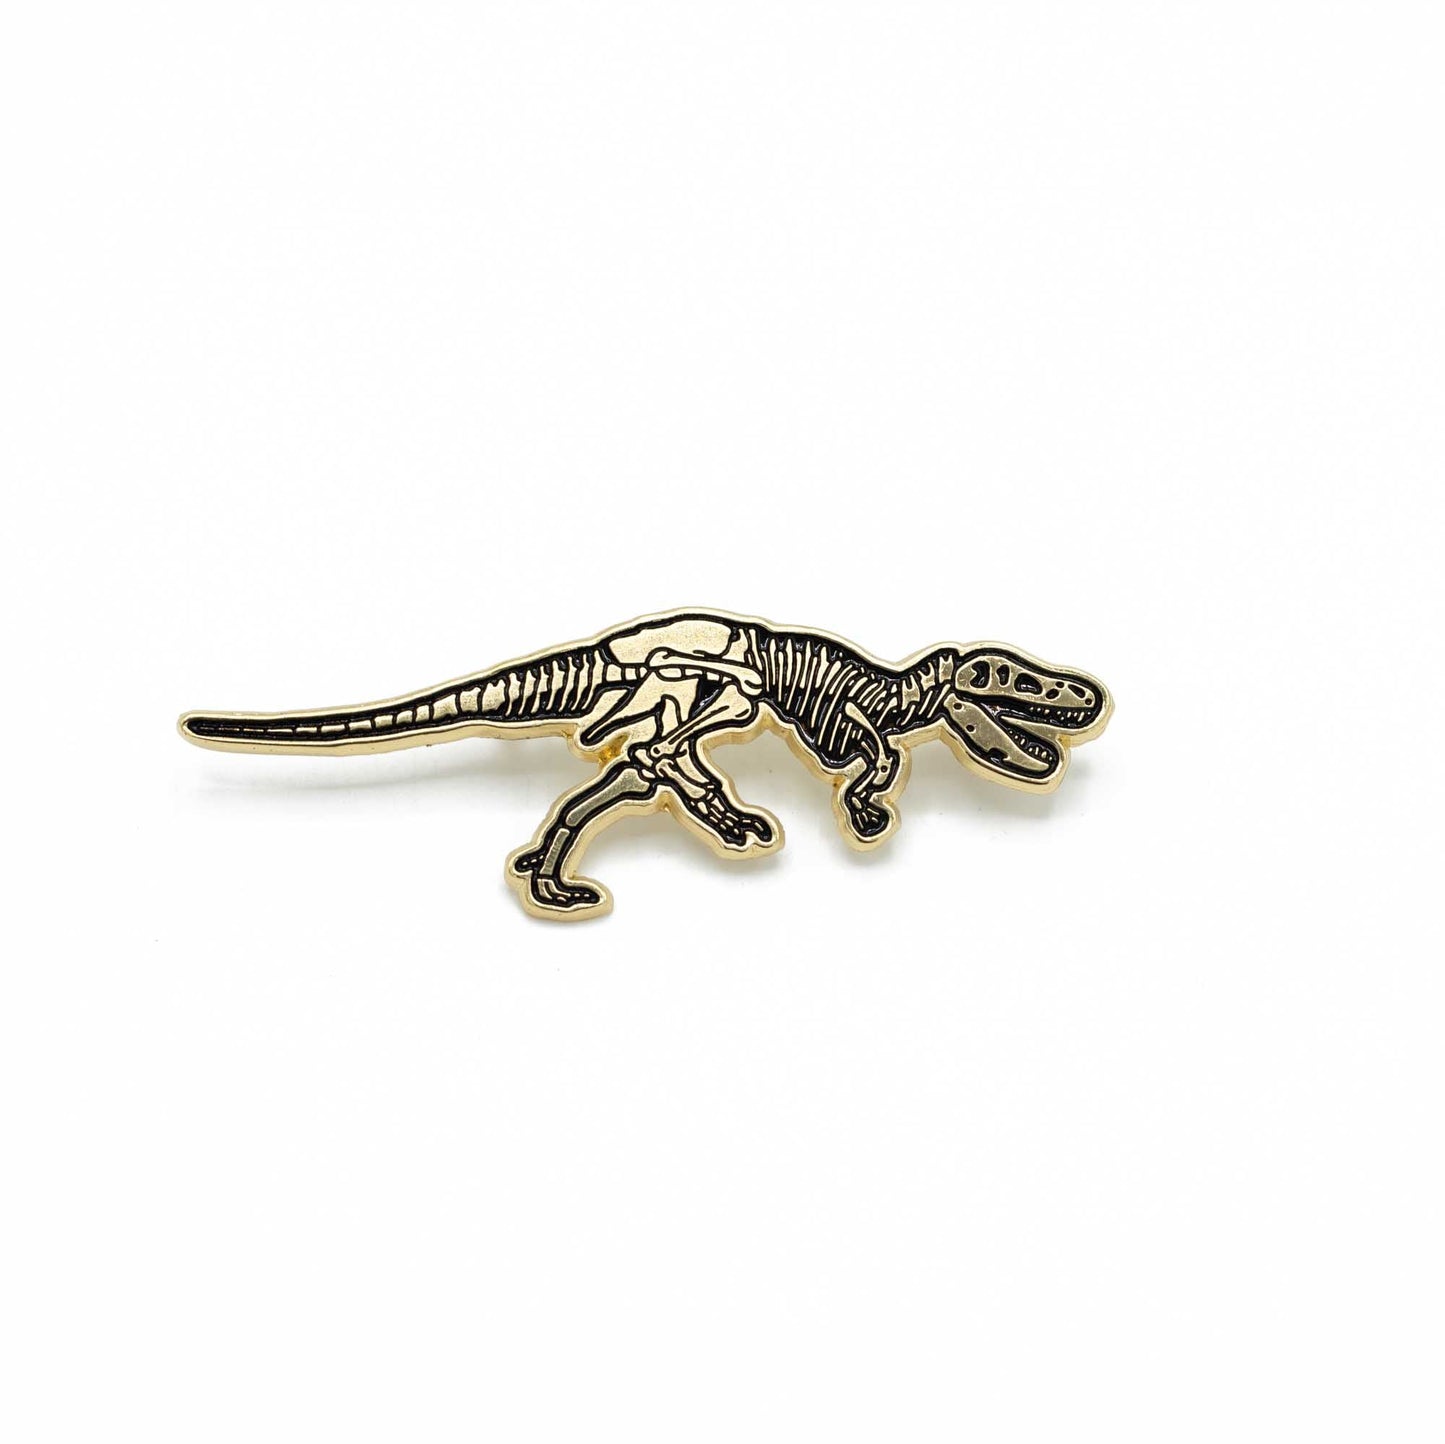 The golden enamel pin shaped as Stan the T. rex's fossil with one leg lifted in walk and the mouth open.